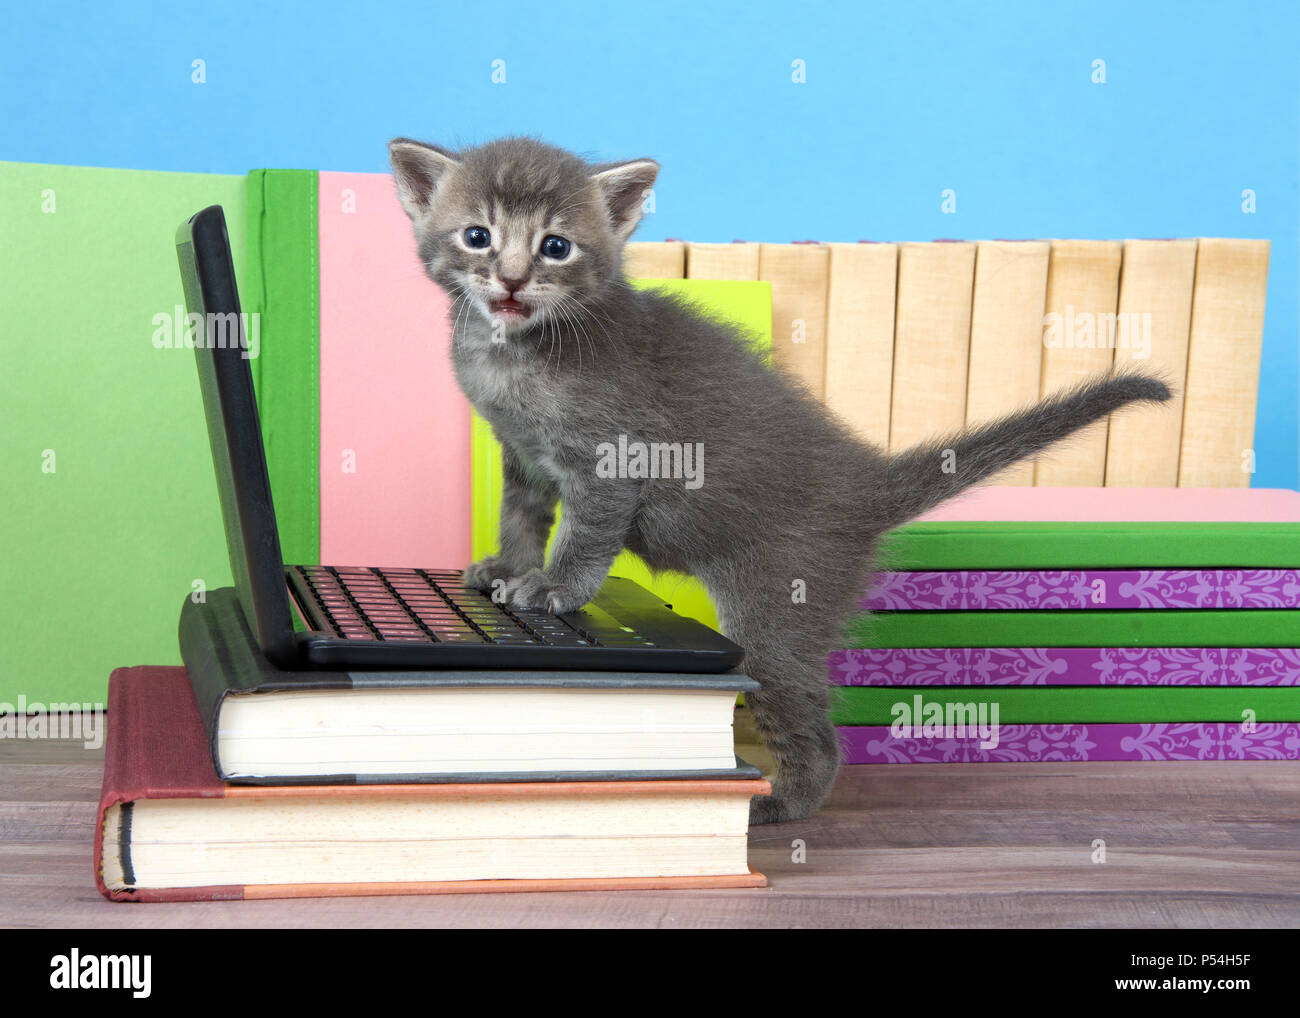 One tiny grey and cream tabby kitten standing with front paws on a miniature laptop computer looking at viewer. Books stacked around, wood floor, blue Stock Photo